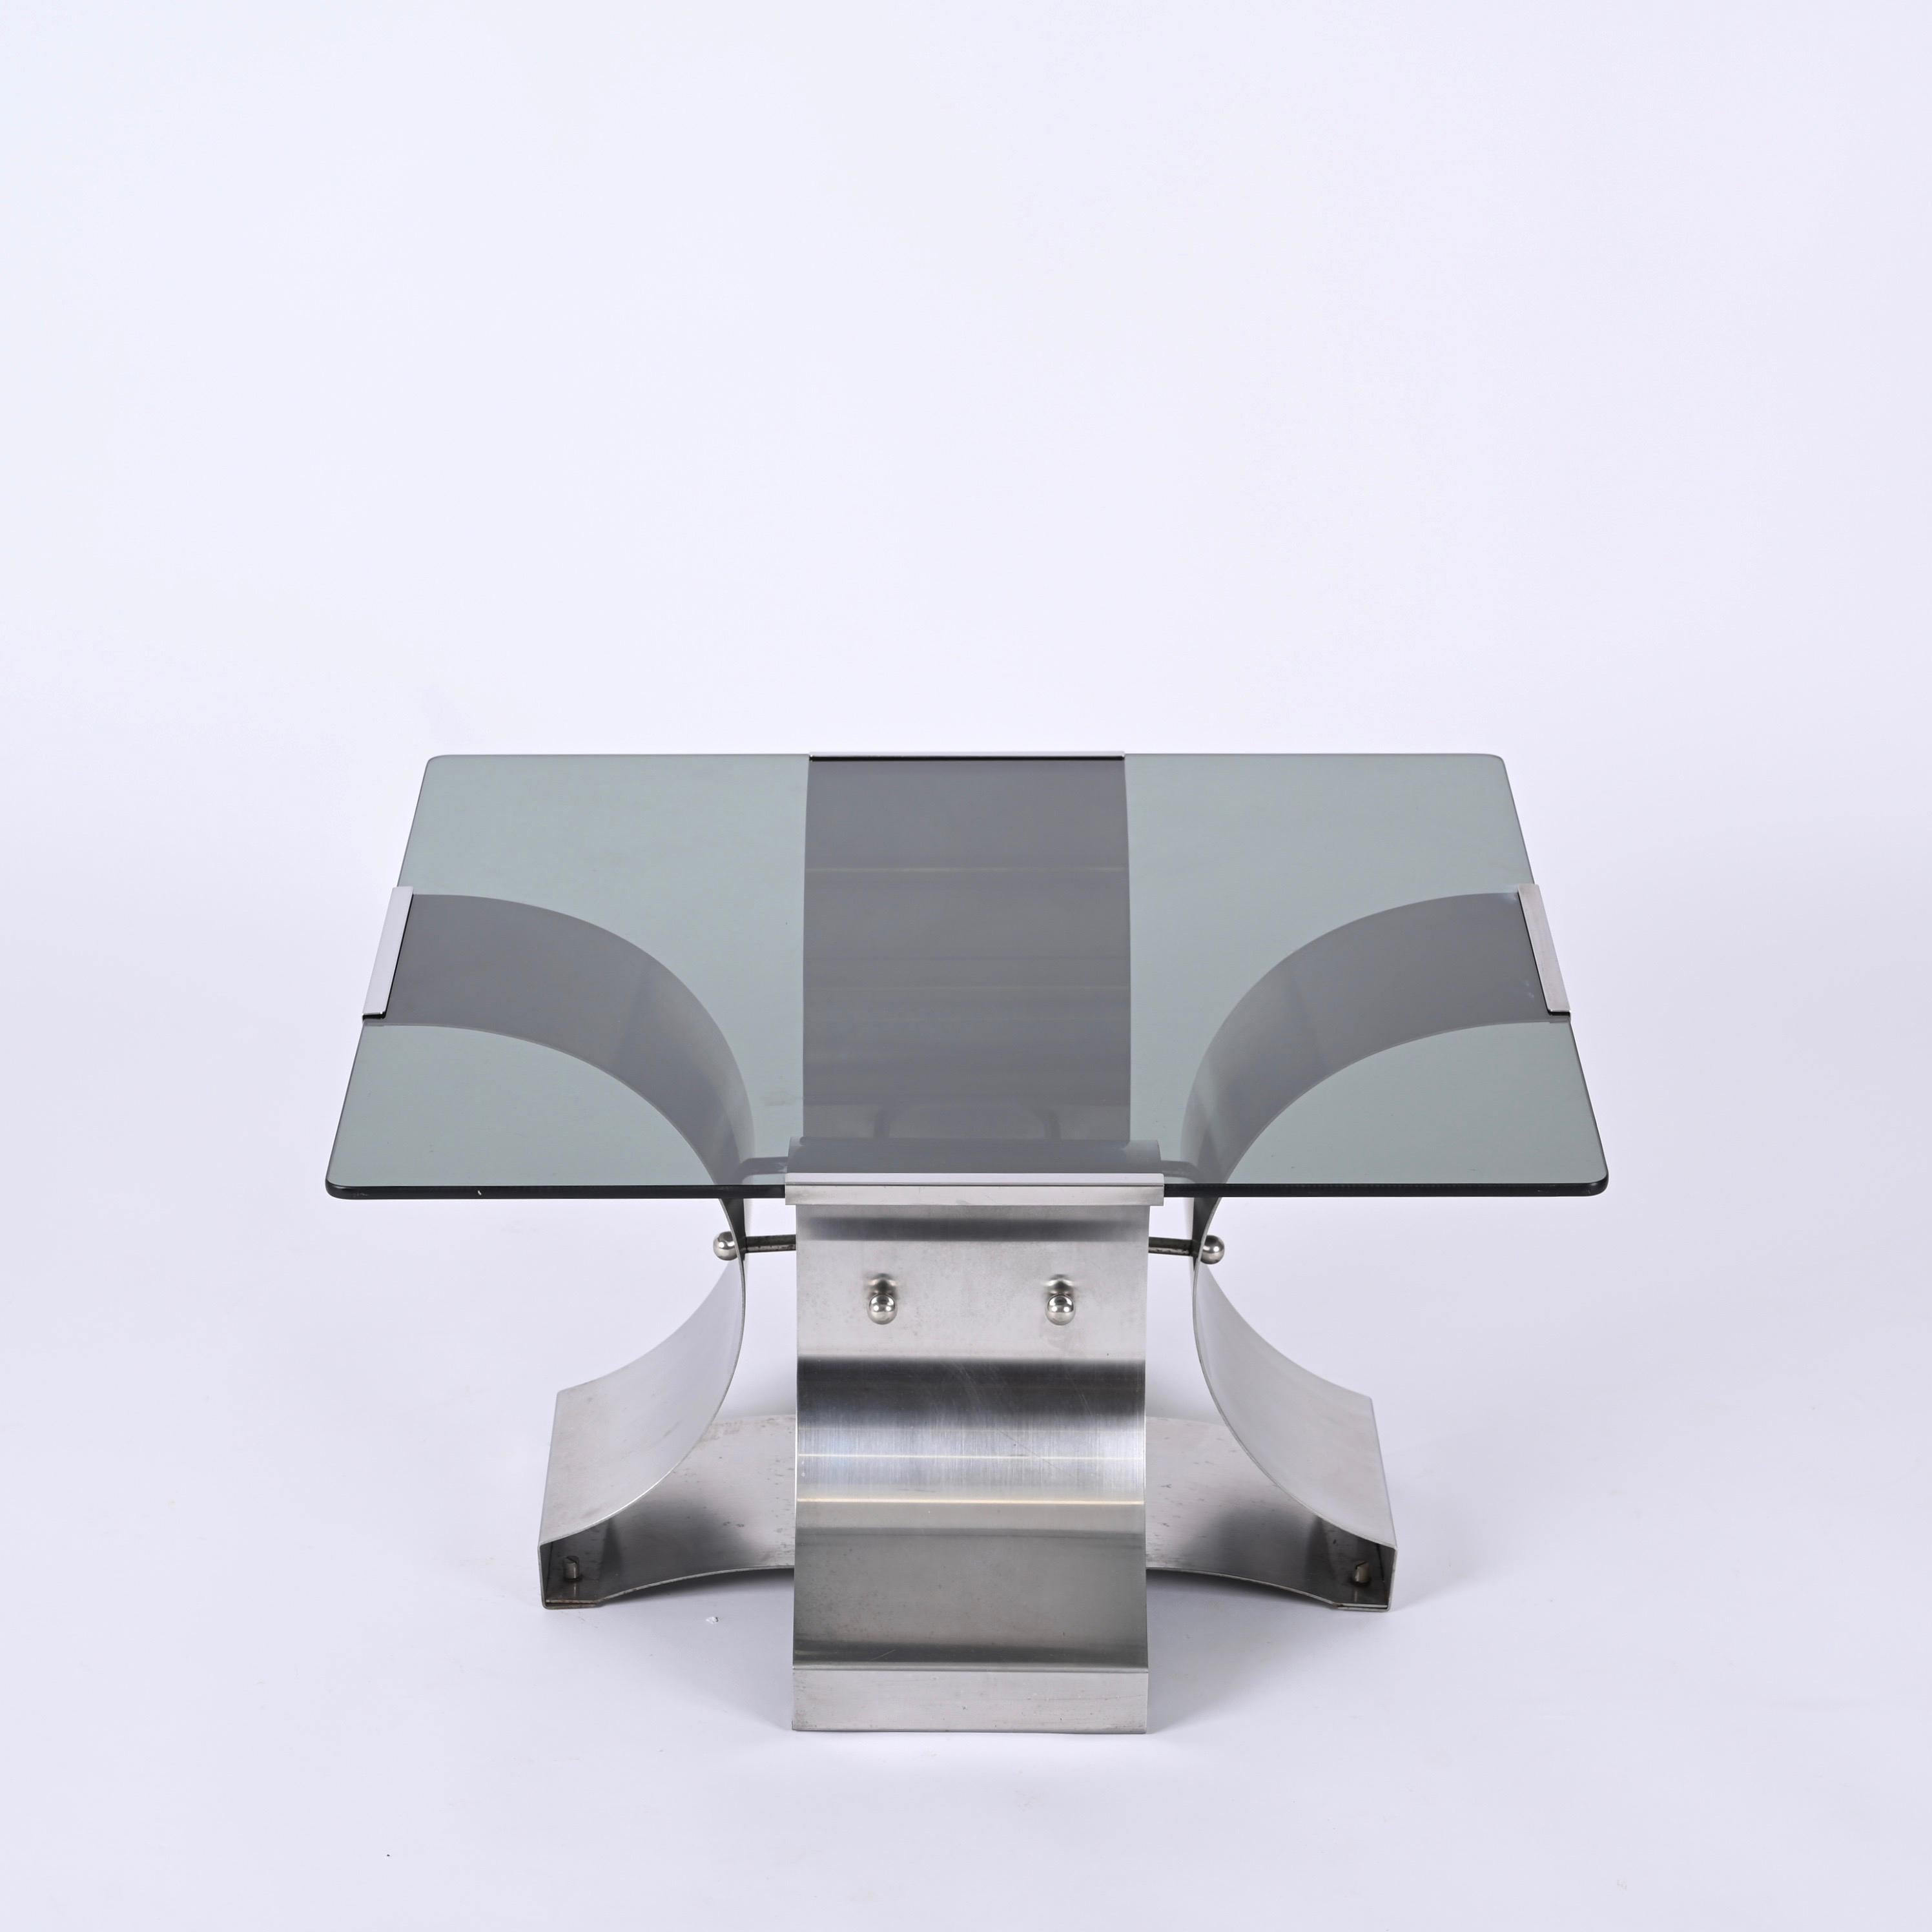 Gorgeous midcentury smoked glass and brushed stainless steel square coffee table. This beautiful piece was designed by Francois Monnet in France during 1970s.

This high-quality table is made of an elegant brushed and curved stainless steel; the